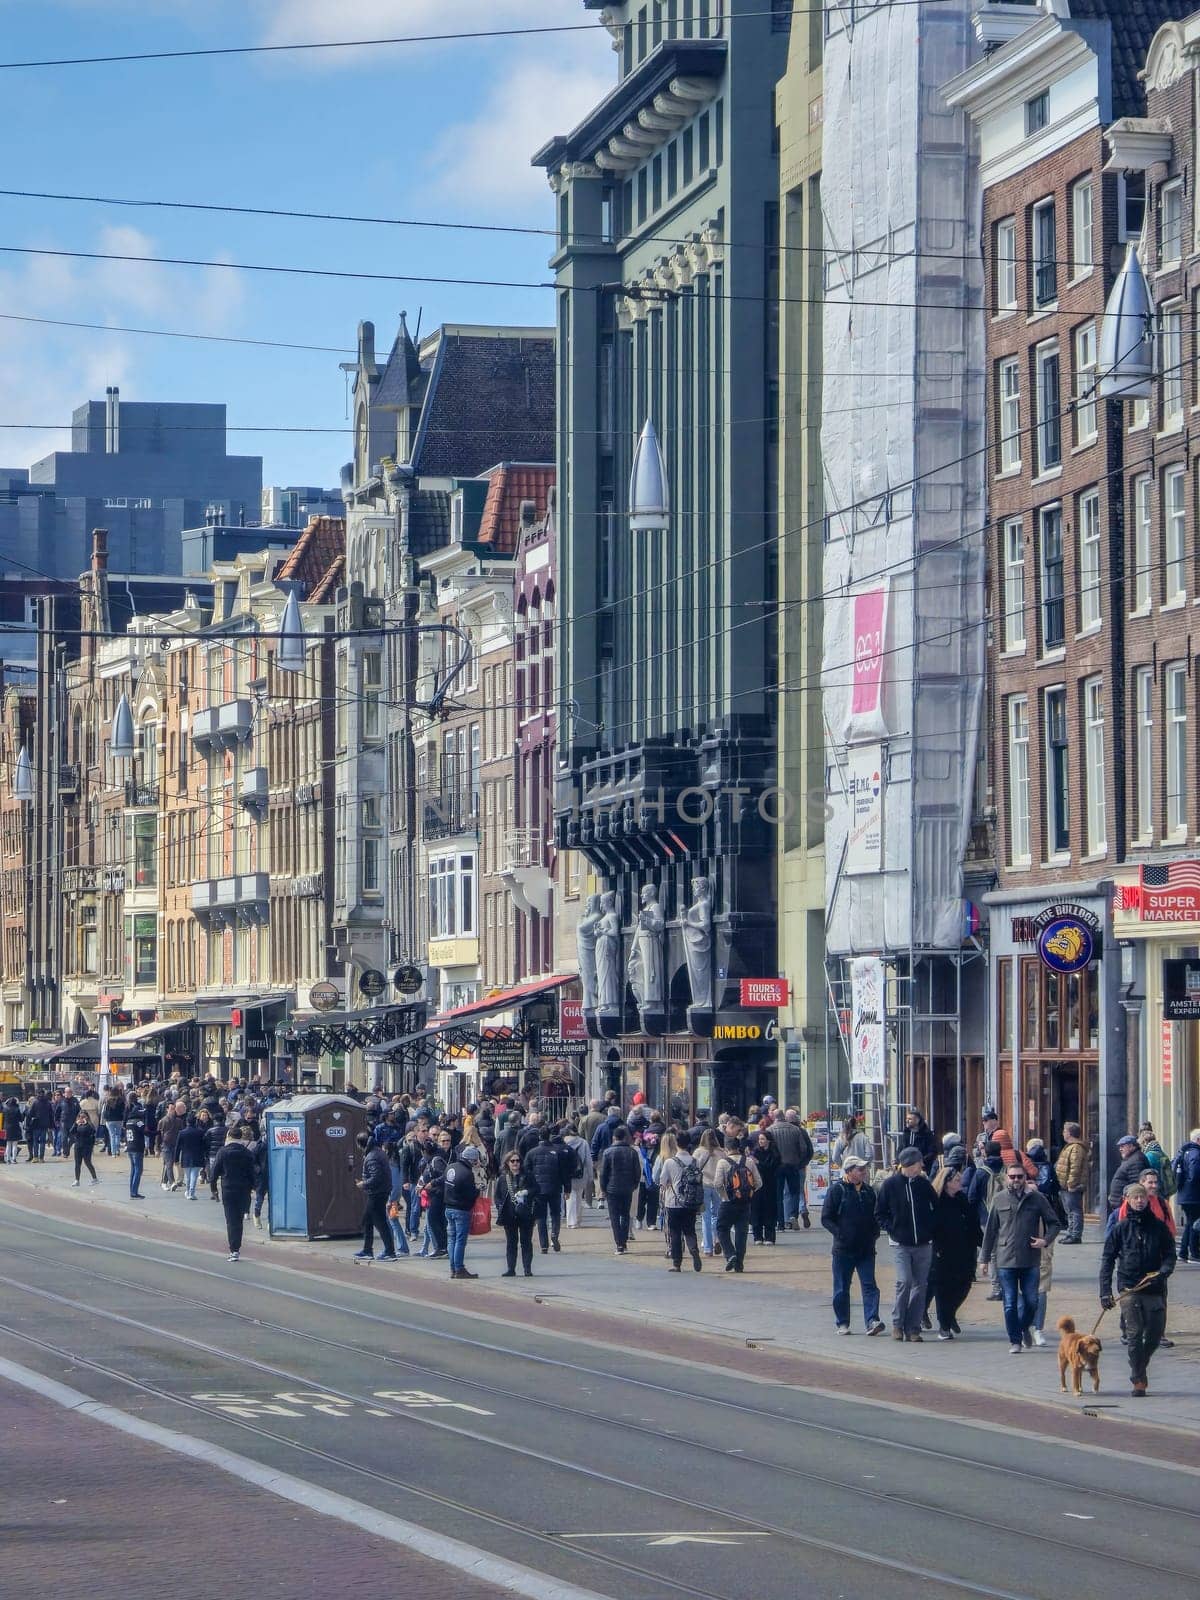 Amsterdam Netherlands 21 April 2024 A diverse group of people walks in a lively hustle down a bustling city street flanked by shops, under a clear blue sky.